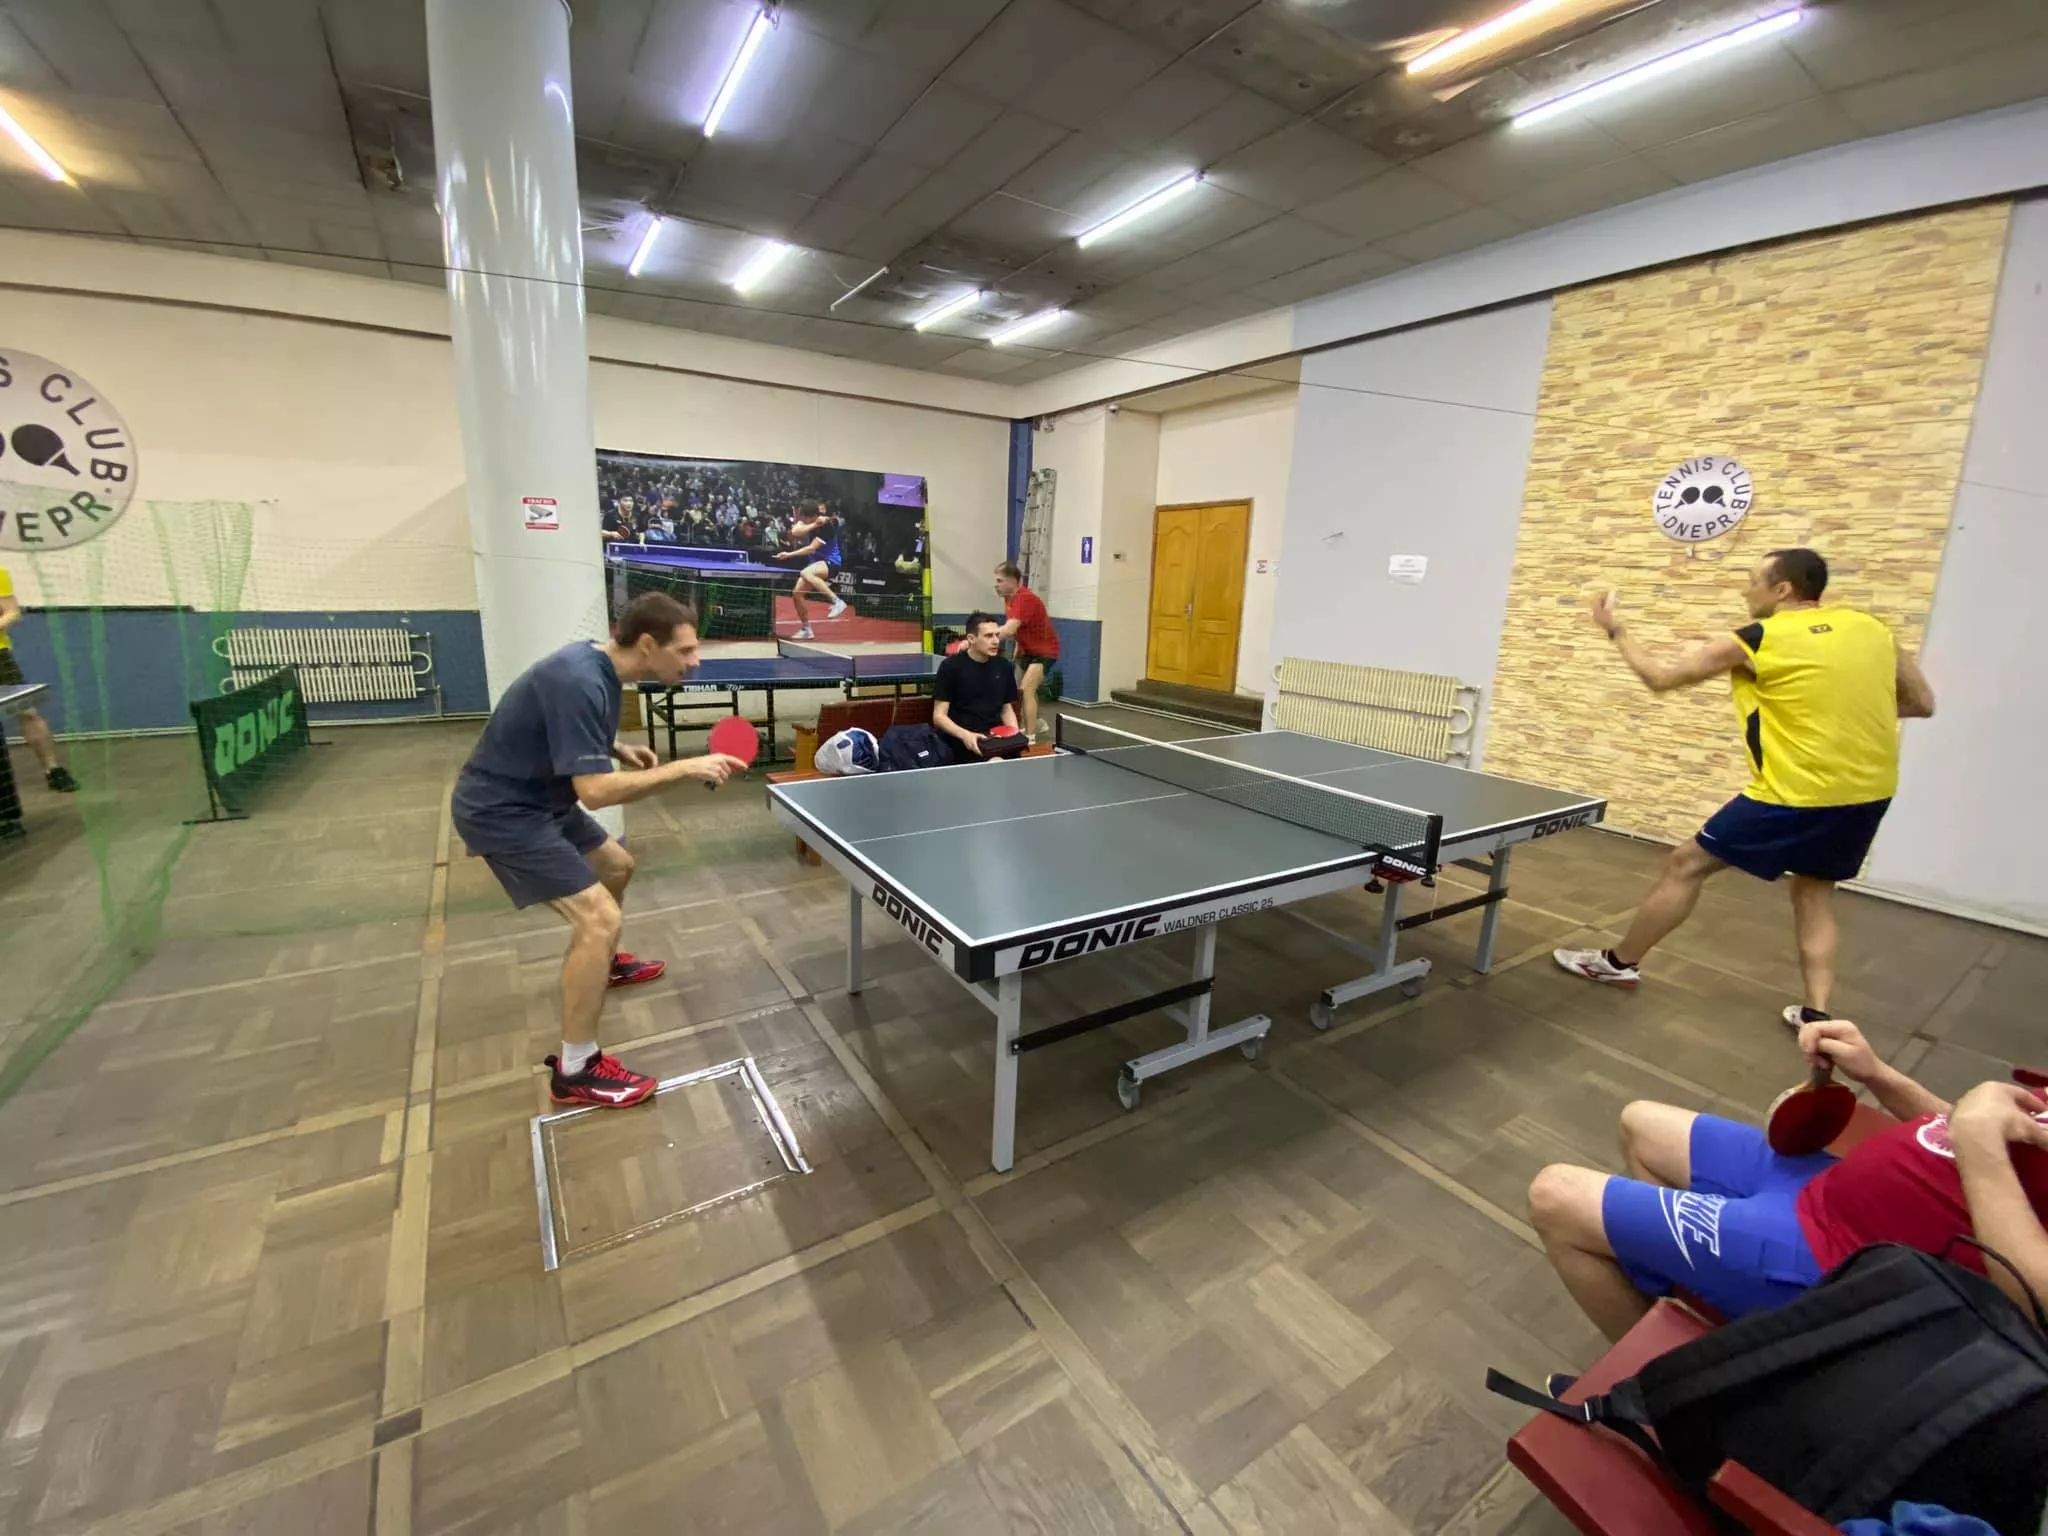 Tennis Club Dnepr in Ukraine, Europe | Ping-Pong - Rated 0.9